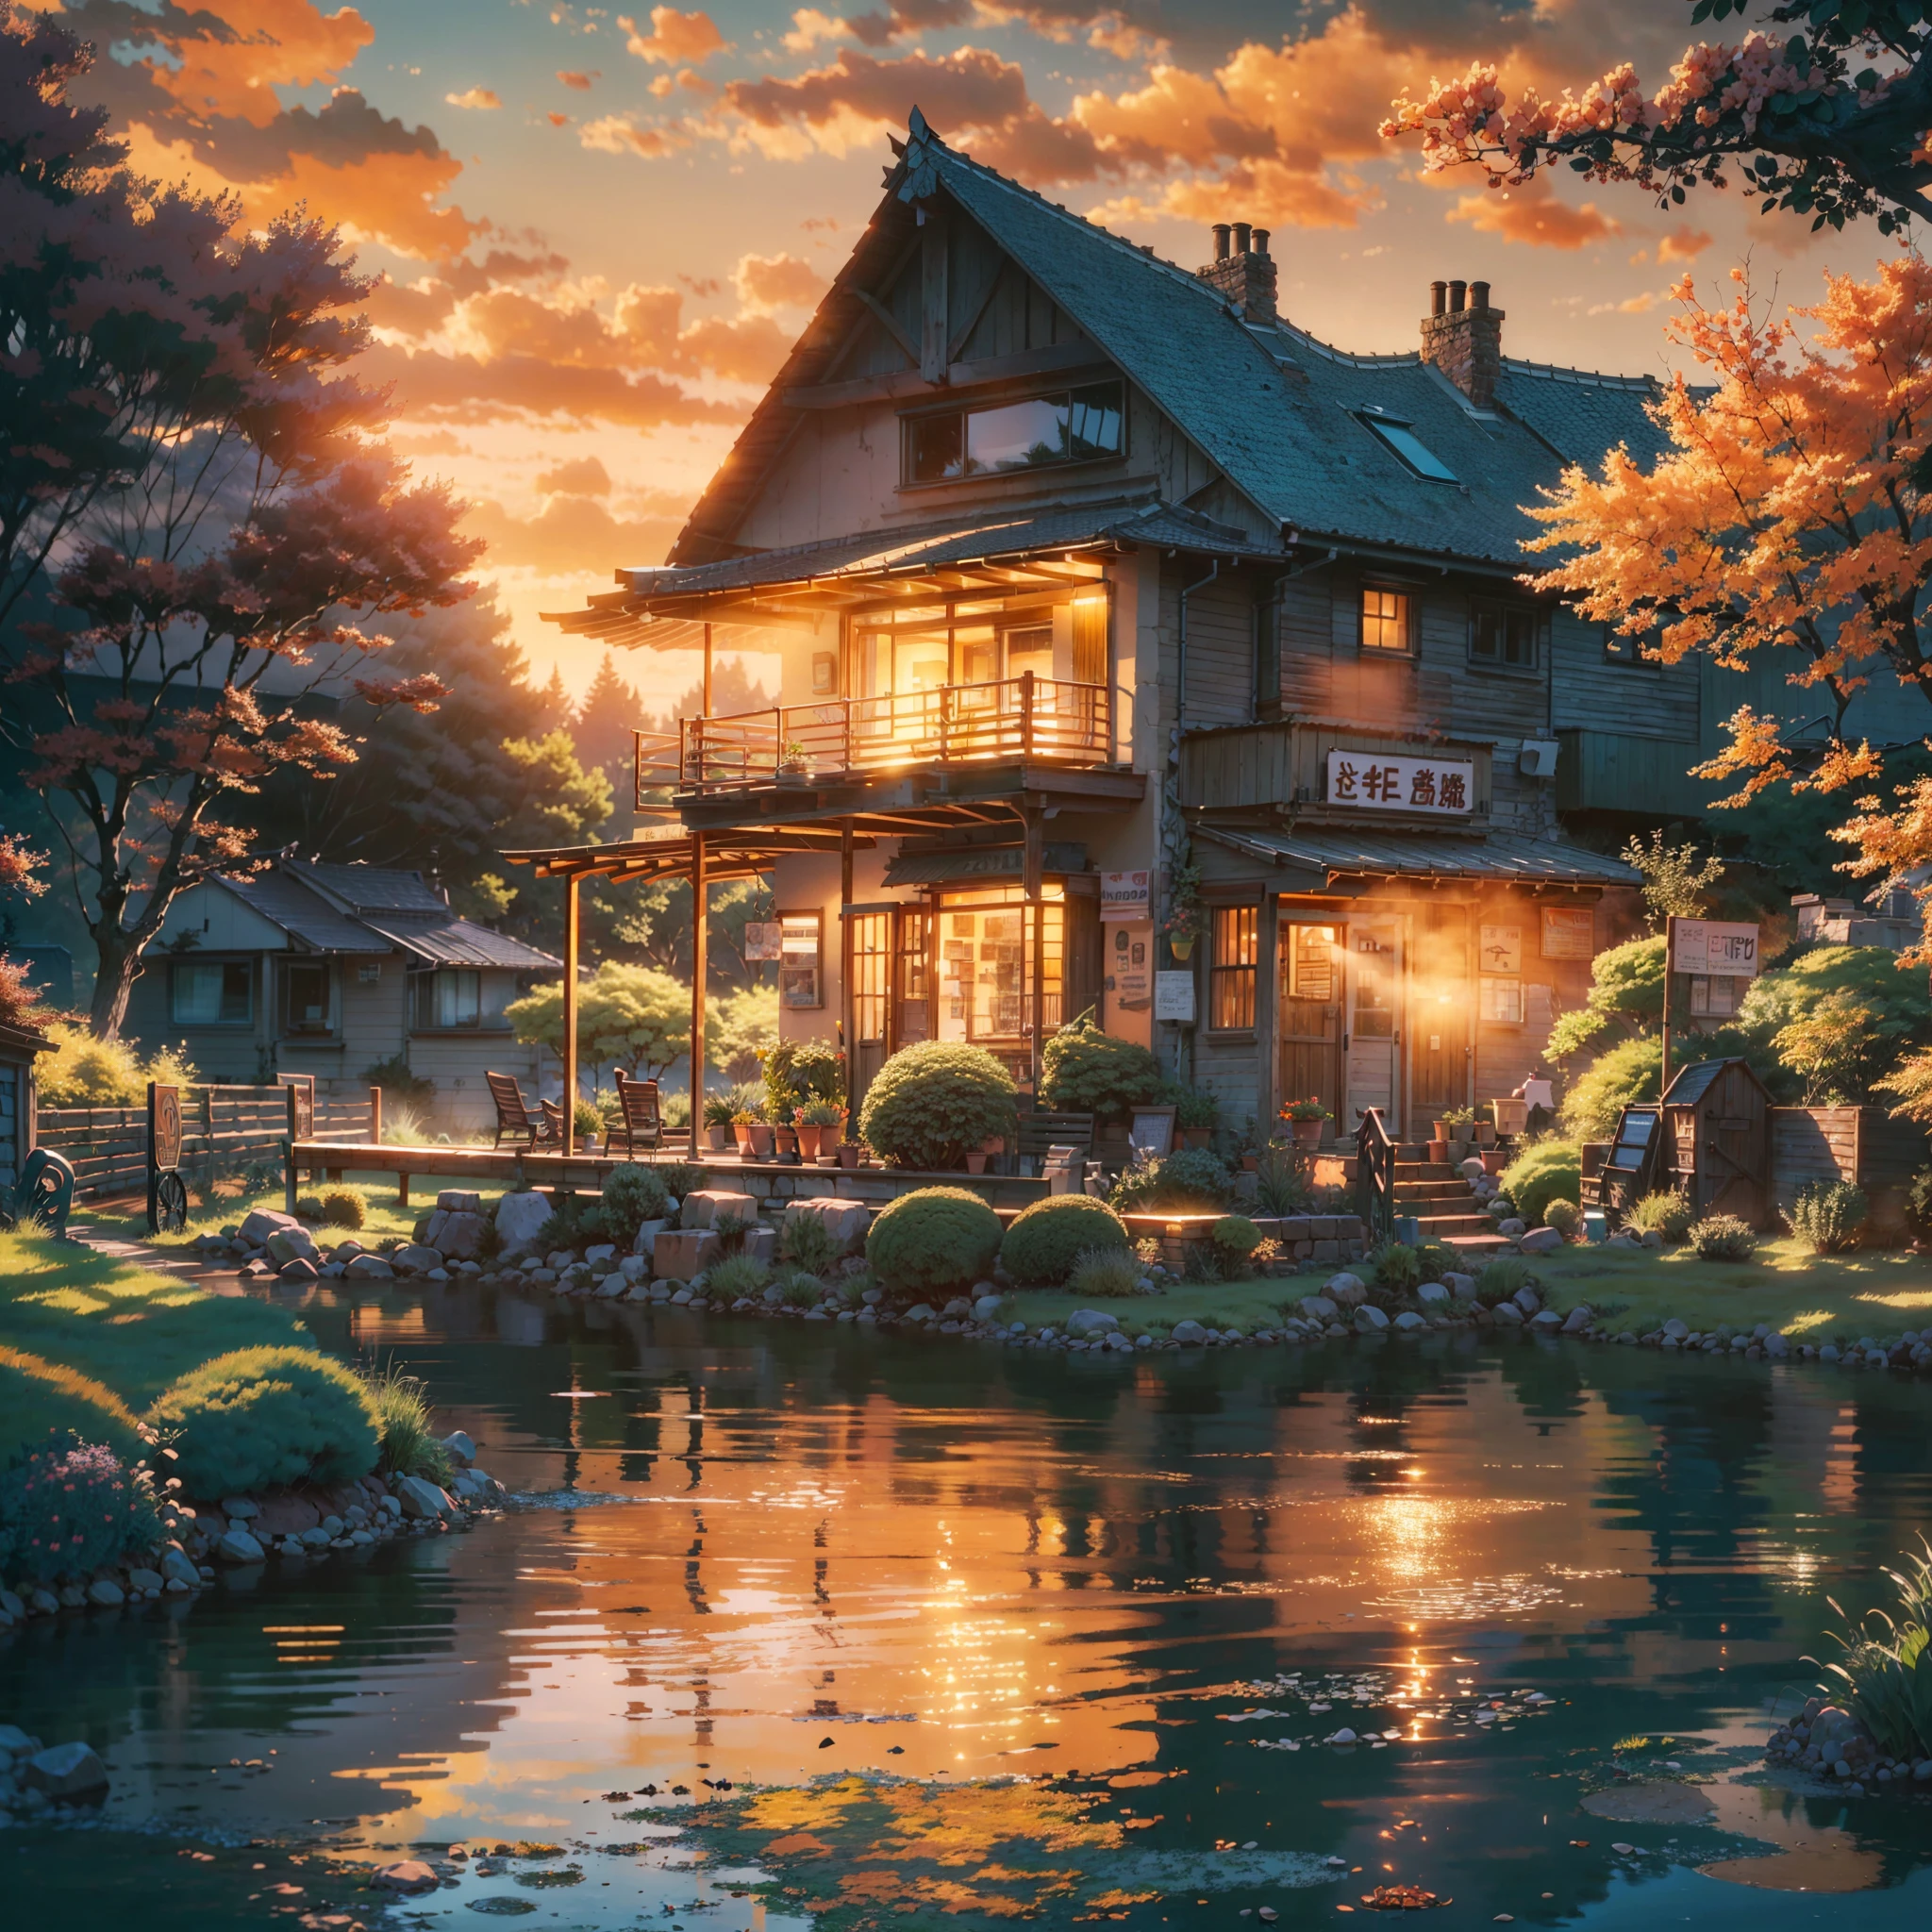 painting of a sunset scene with a river and a house, beautiful anime scenery, anime beautiful peace scene, anime landscape wallpaper, beautiful anime scene, anime scenery, scenery artwork, anime art wallpaper 4 k, anime art wallpaper 4k, anime background art, anime style 4 k, anime landscape, beautiful art uhd 4 k, anime wallpaper 4k, anime wallpaper 4 k